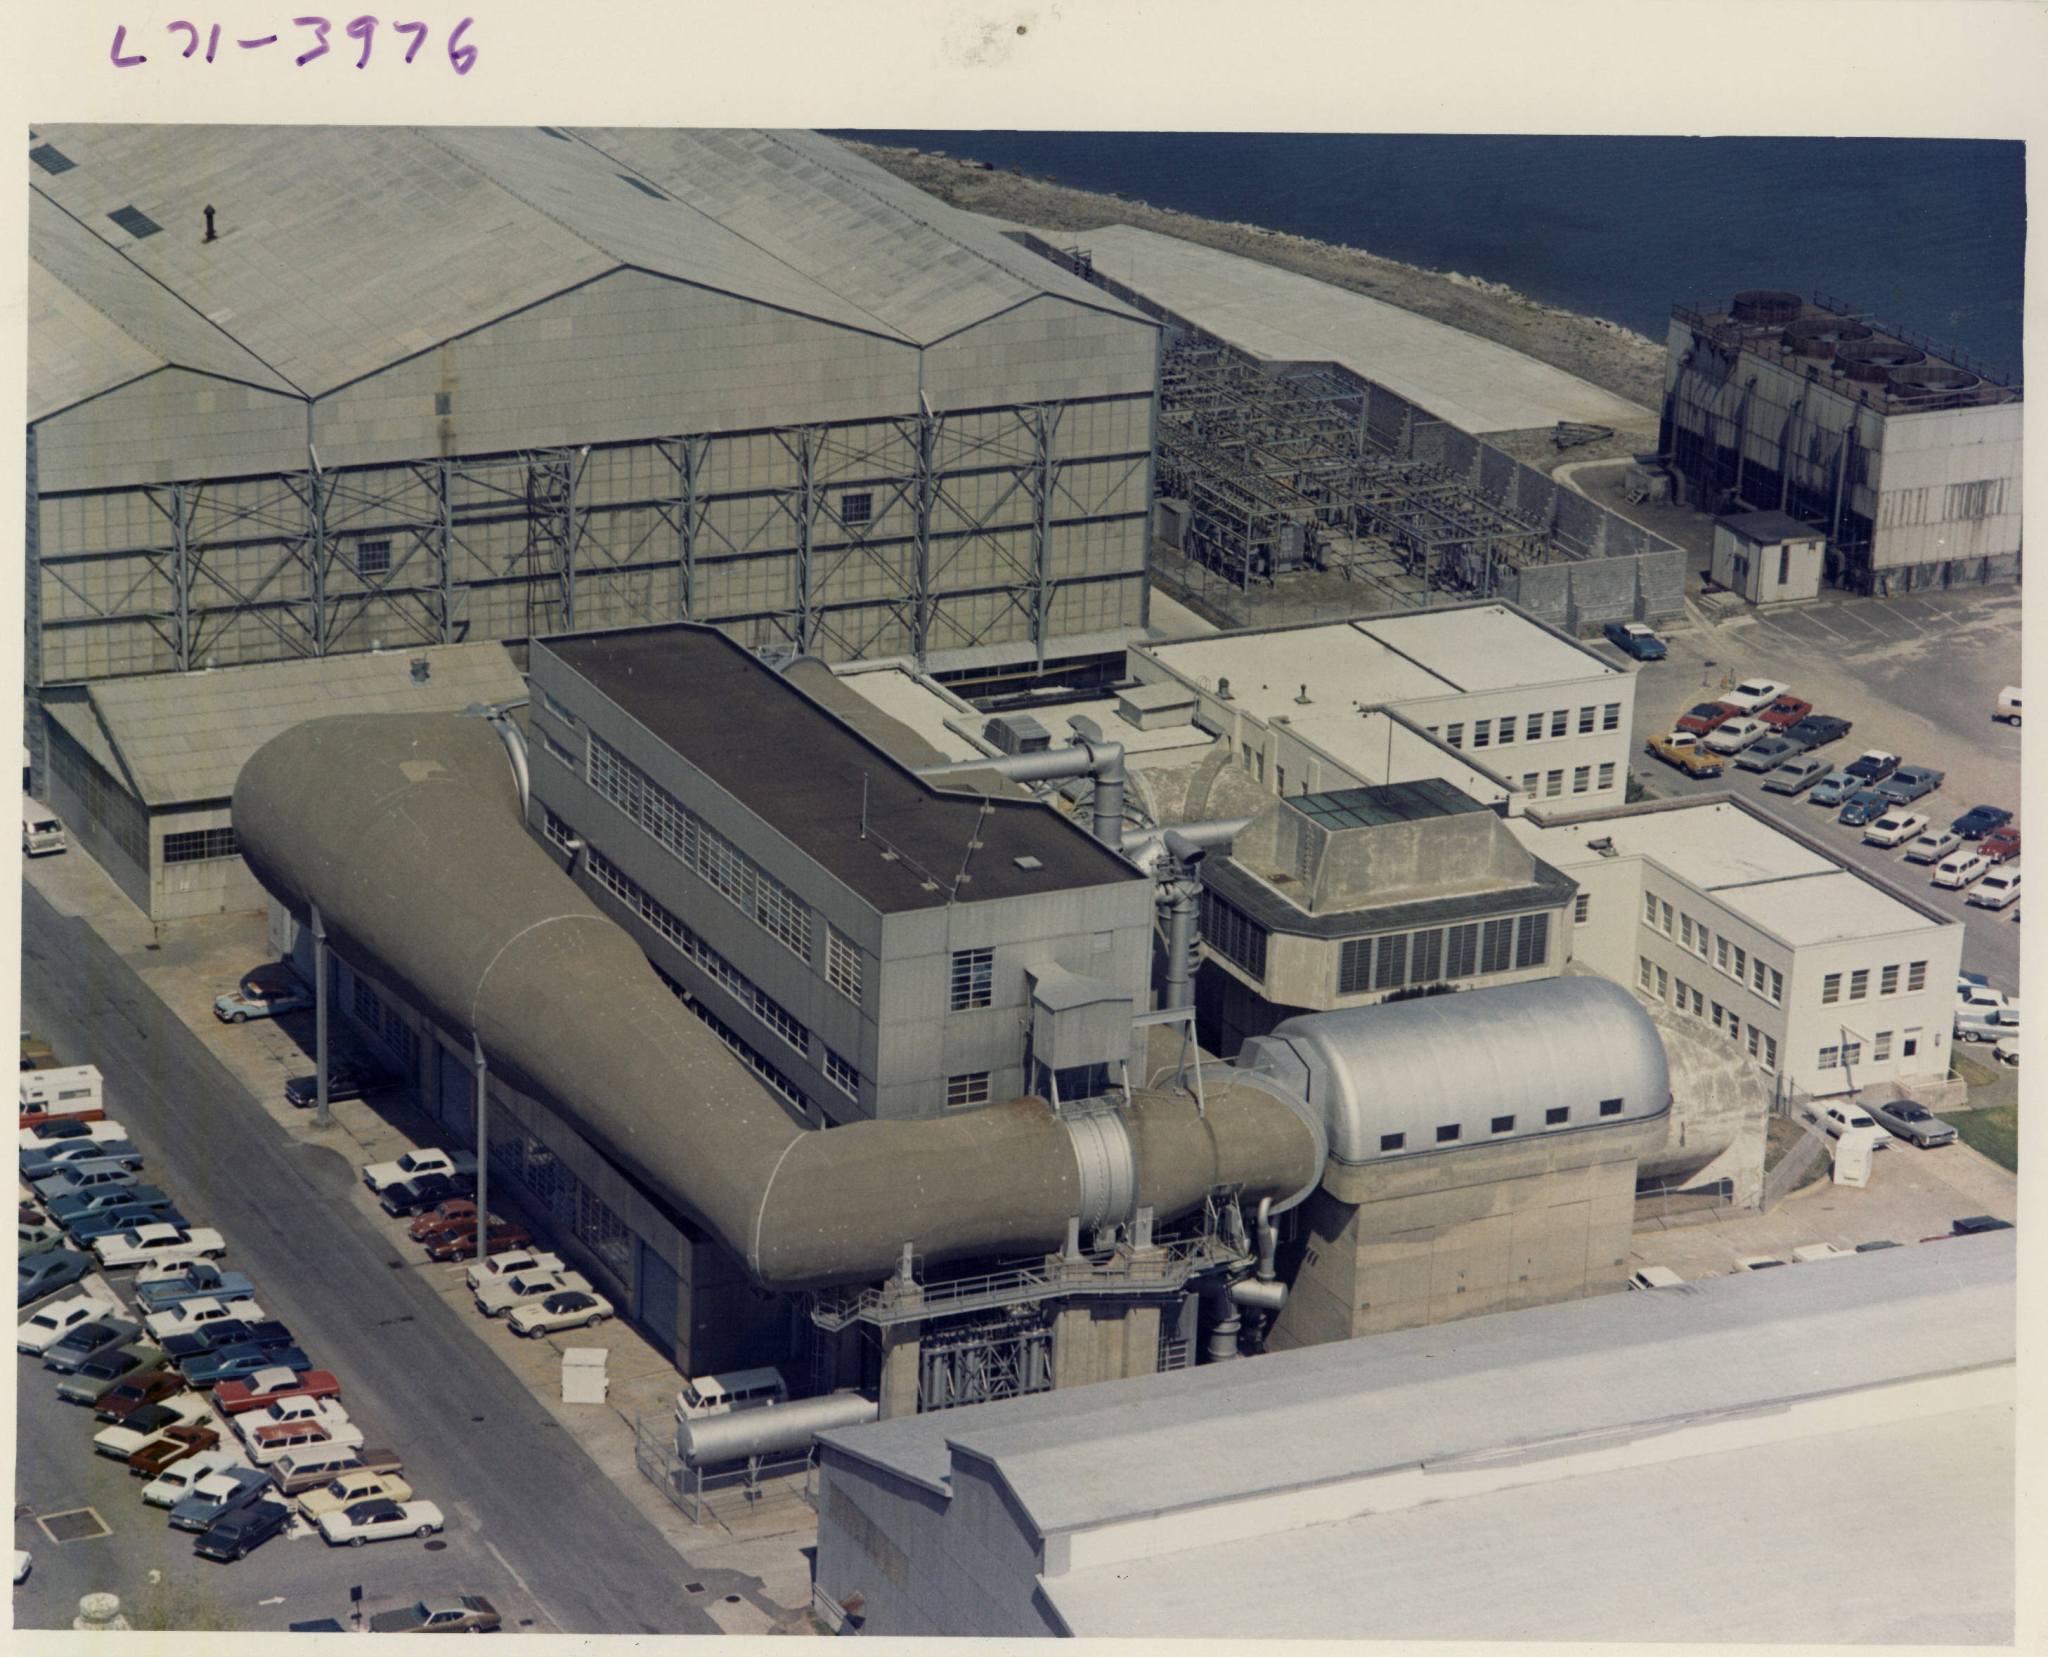 In this aerial view of Building 640 taken in 1971, the TPT can be seen in the foreground.